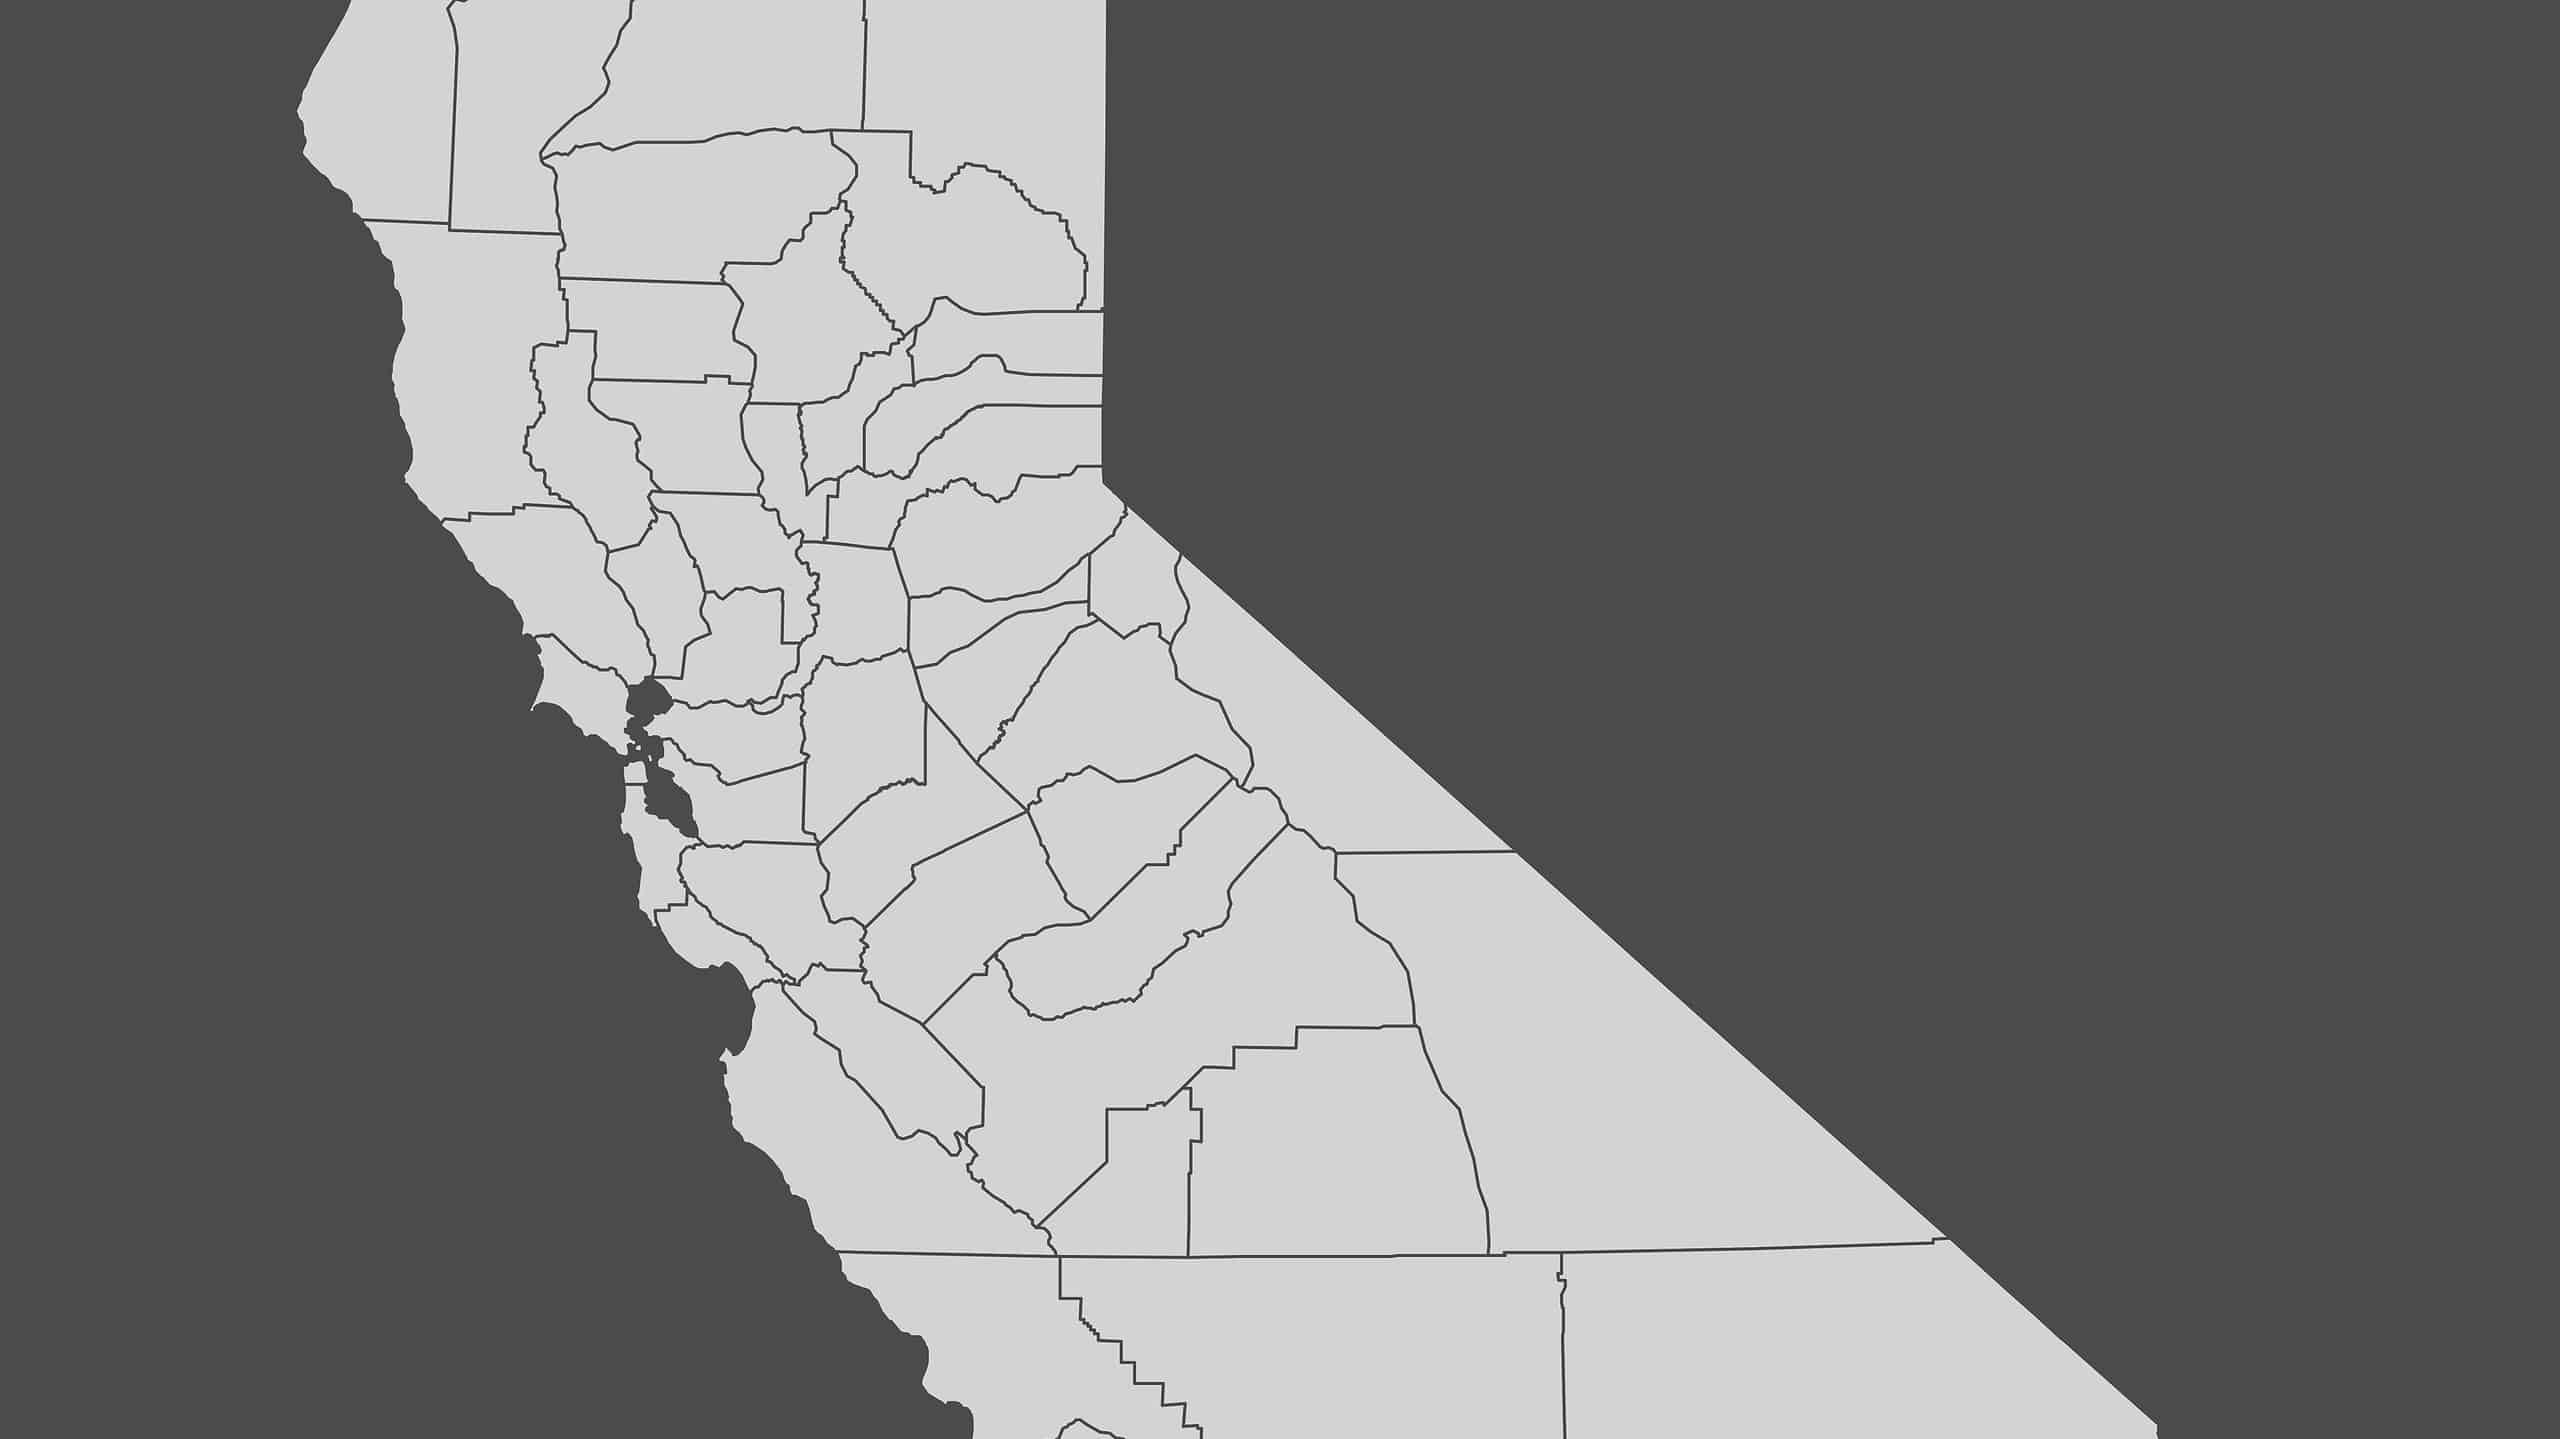 California counties map isolated on dark background